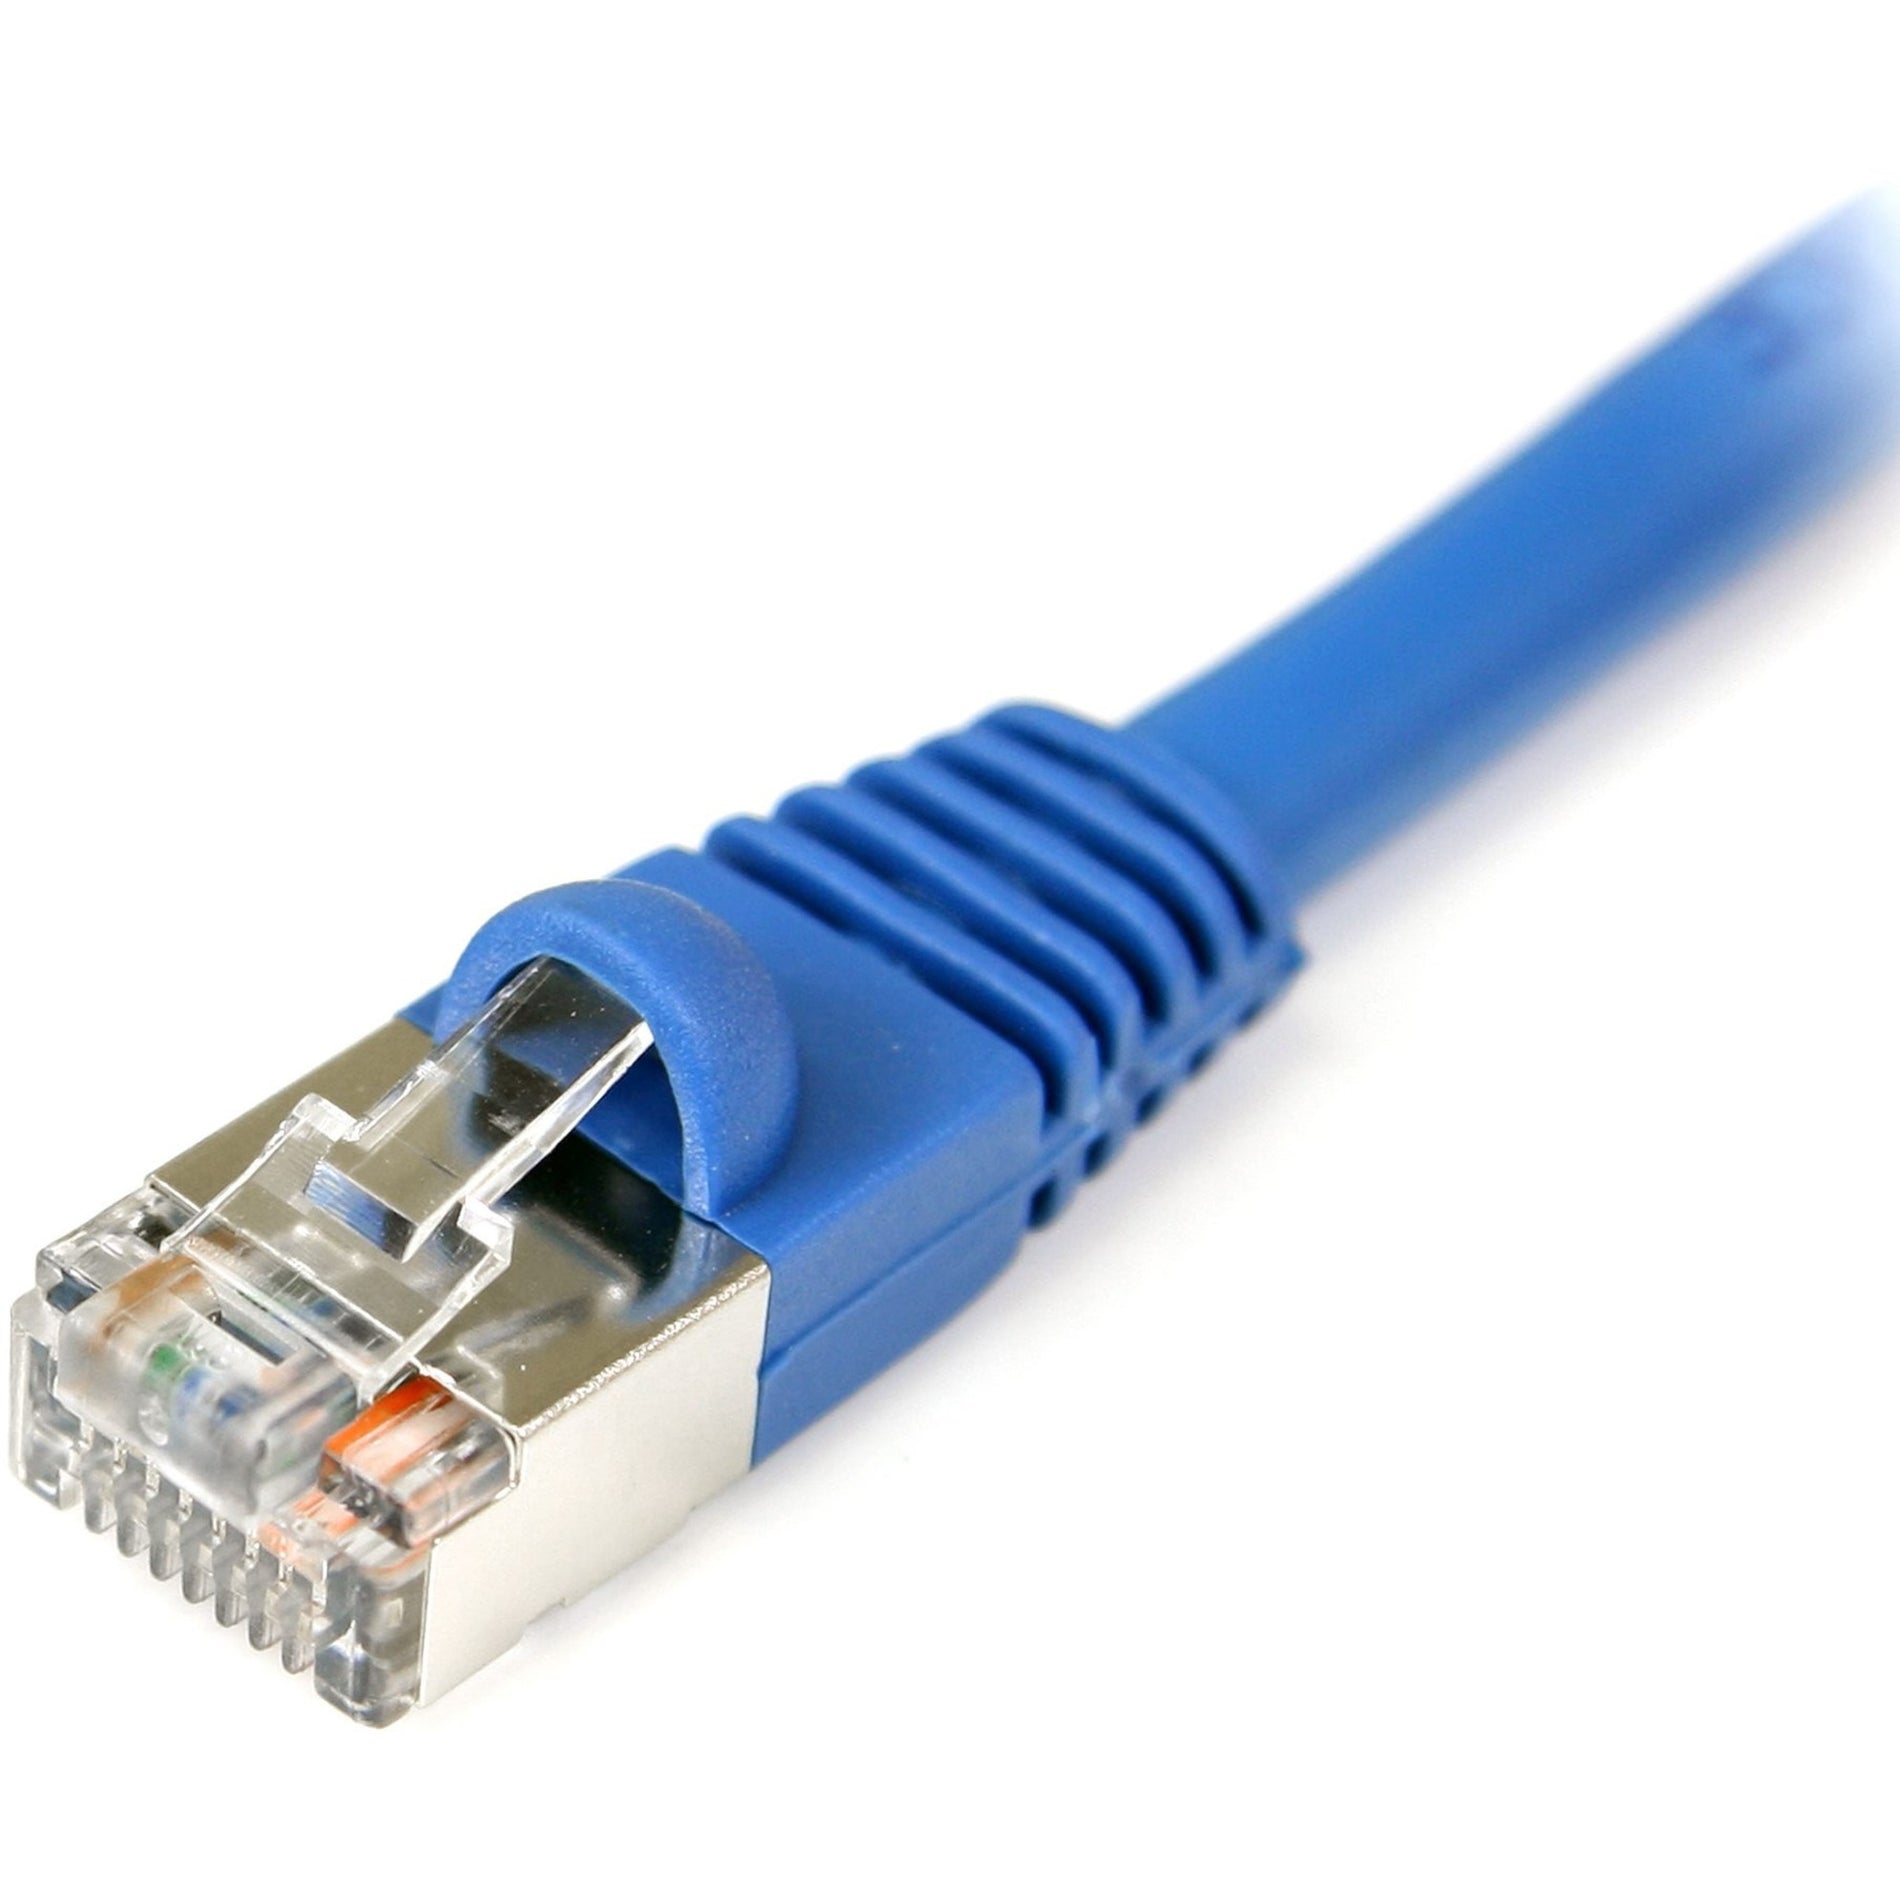 StarTech.com S45PATCH50BL 50 ft Blue Shielded Snagless Cat5e Patch Cable, Molded, Flexible, EMI/RF Protection